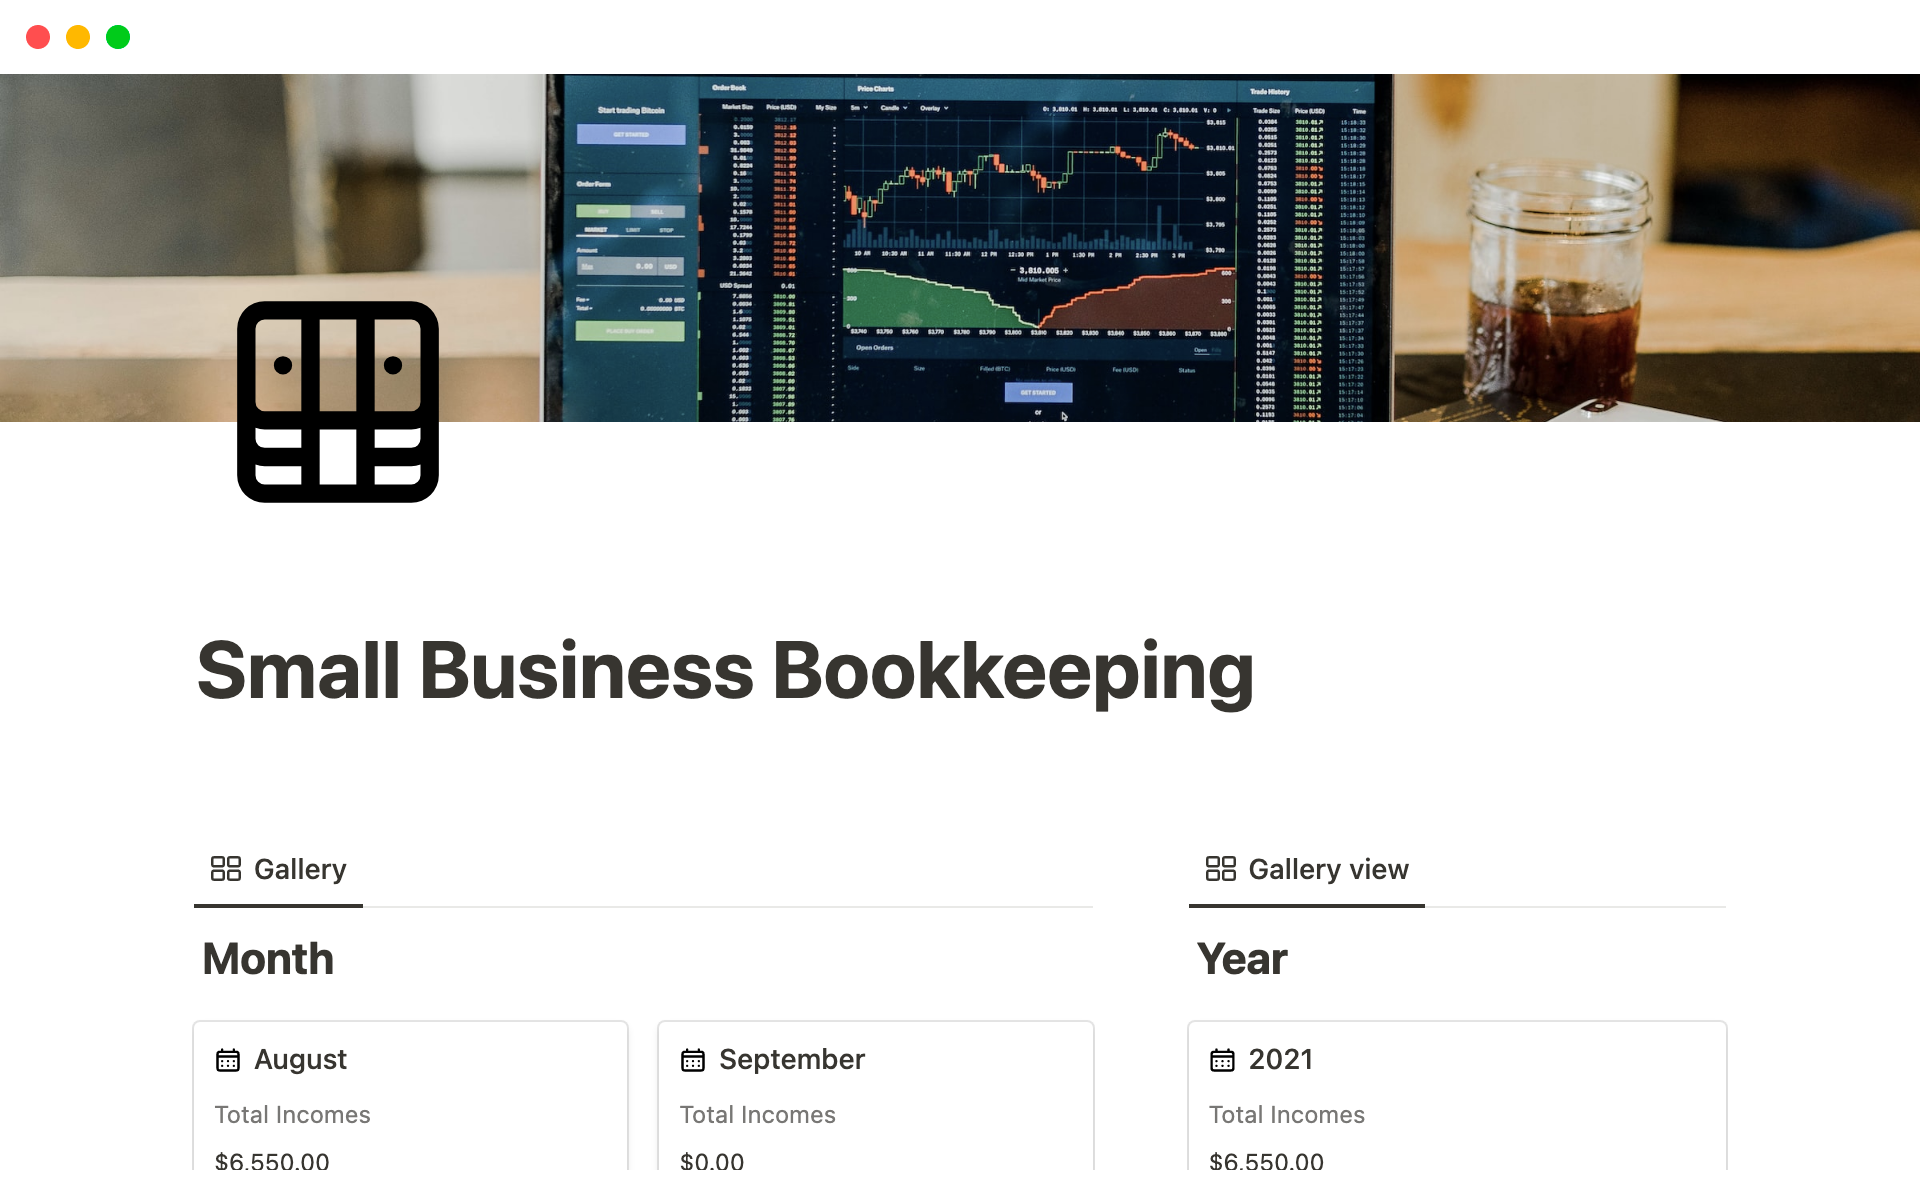 Our Small Business Bookkeeping Notion Template, you can easily track income and expenses, manage invoices, and stay on top of your business